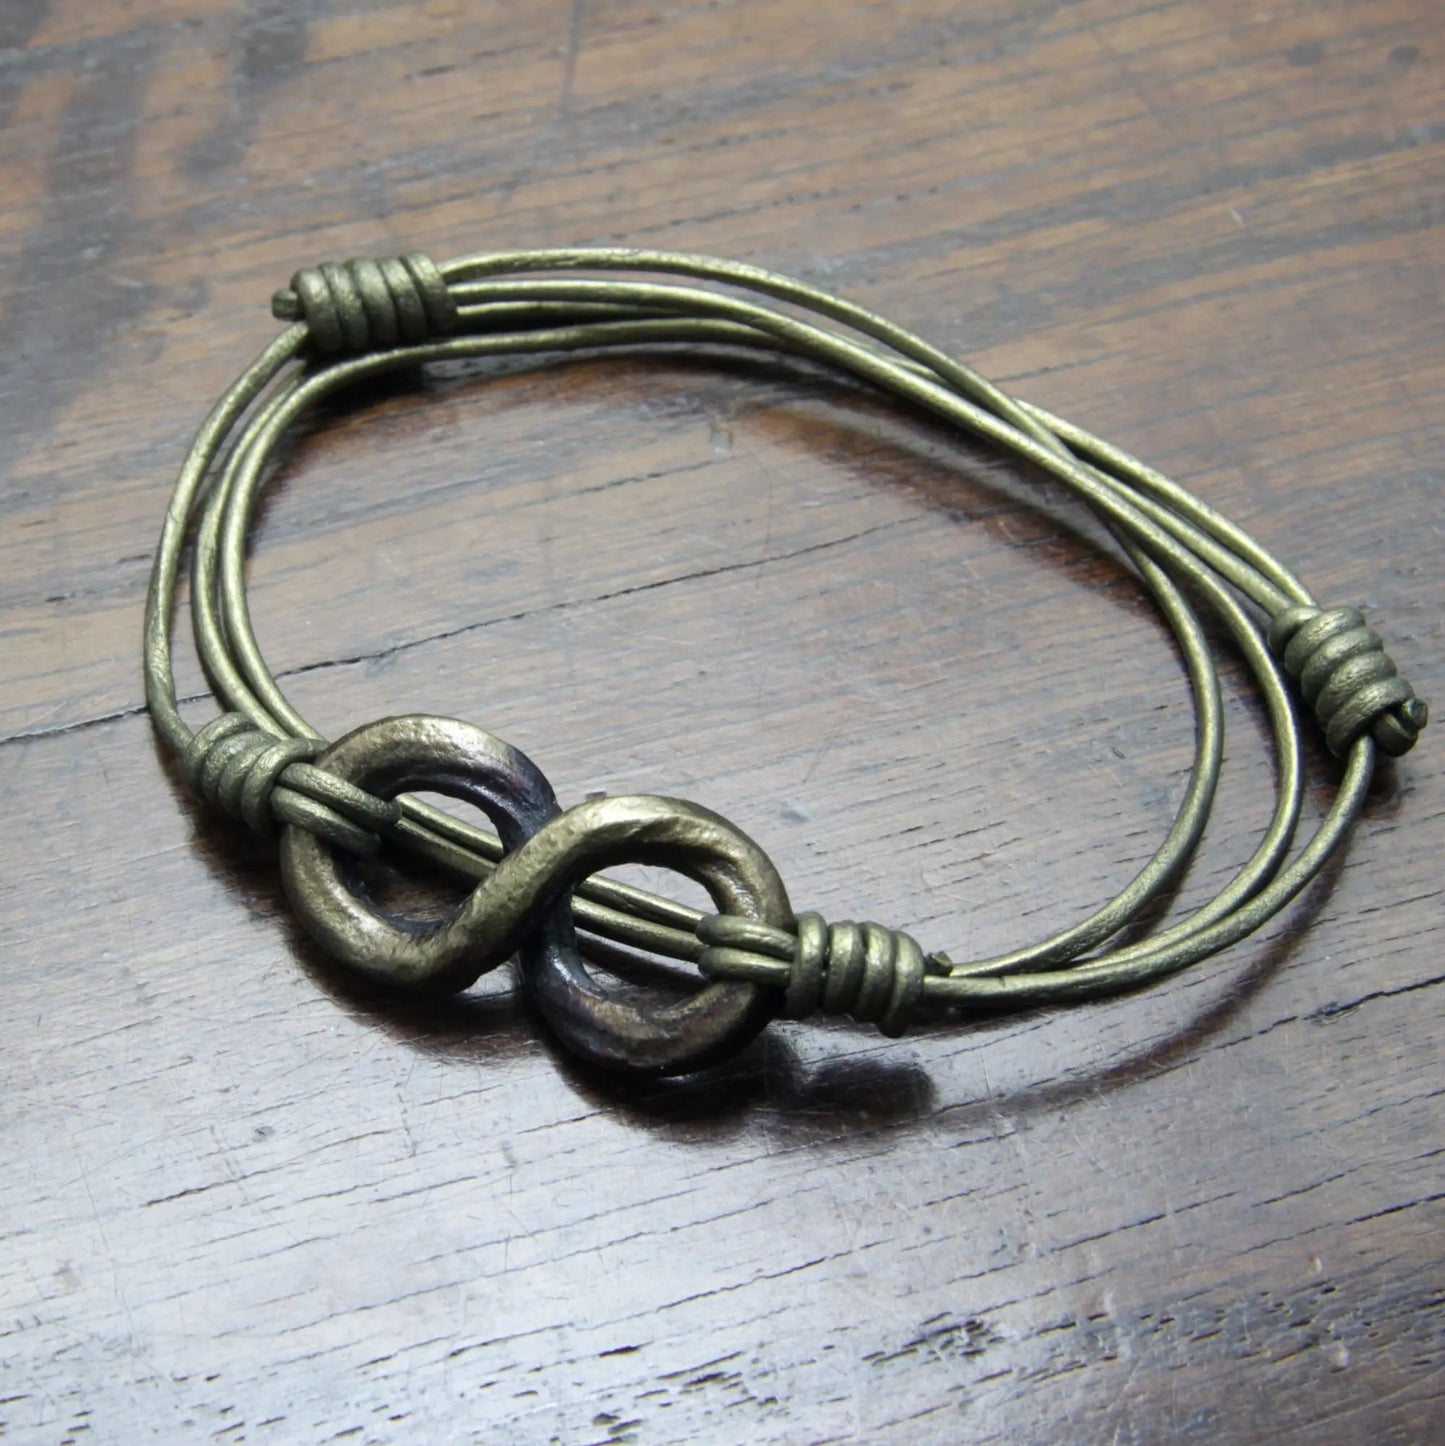 Main photo of a brass coloured Forged Iron Infinity Leather Wrap Bracelet and Necklace on a metallic green leather cord